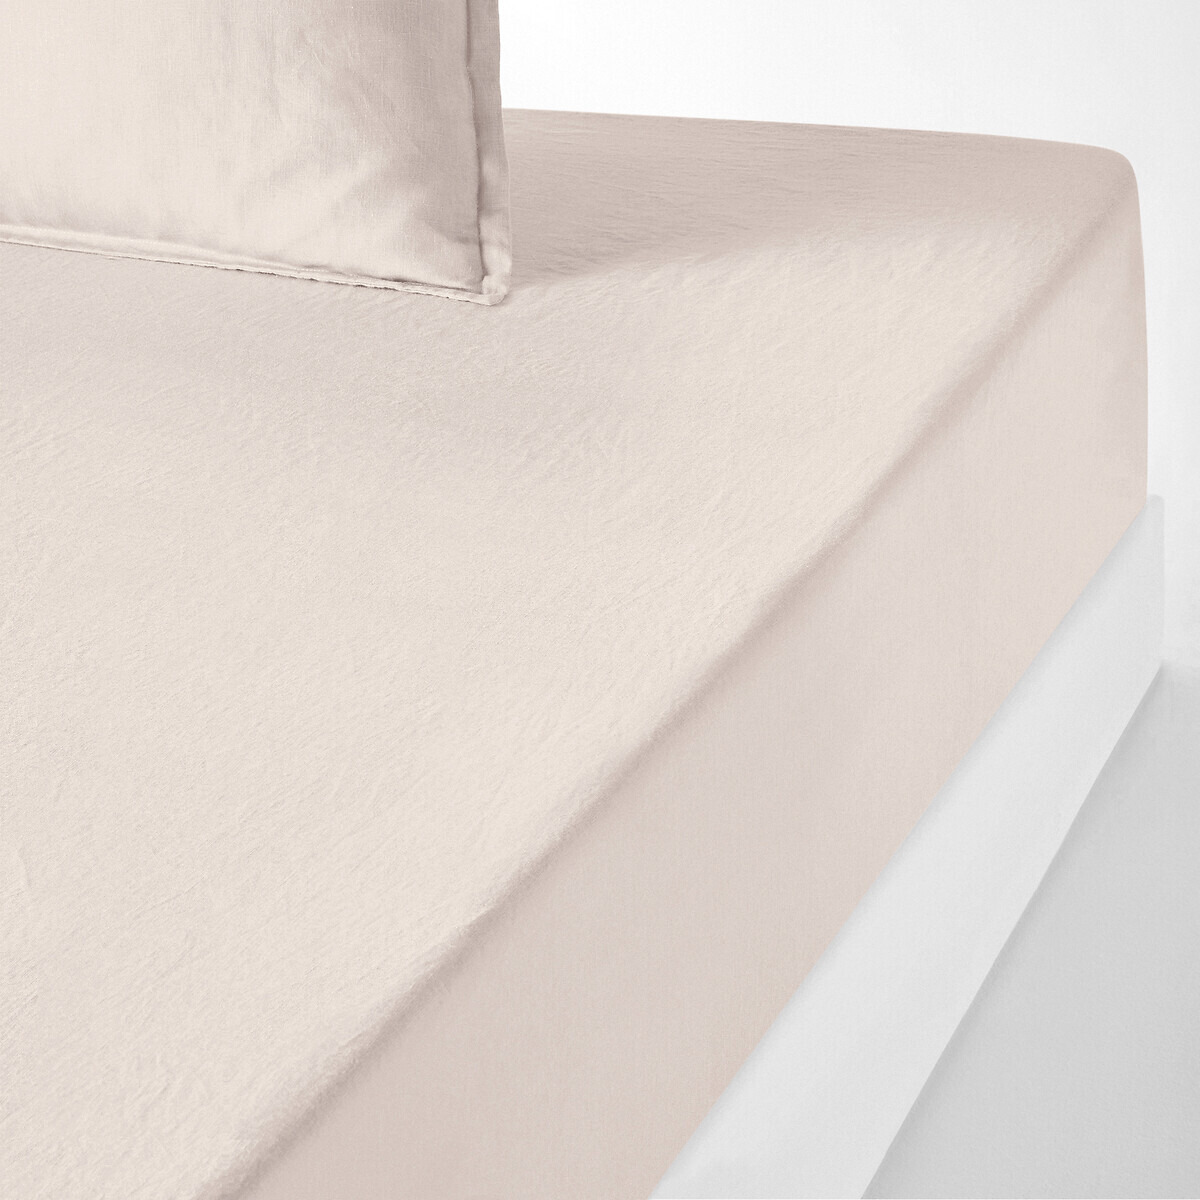 Linot 35cm High 100% Washed Linen Fitted Sheet - image 1